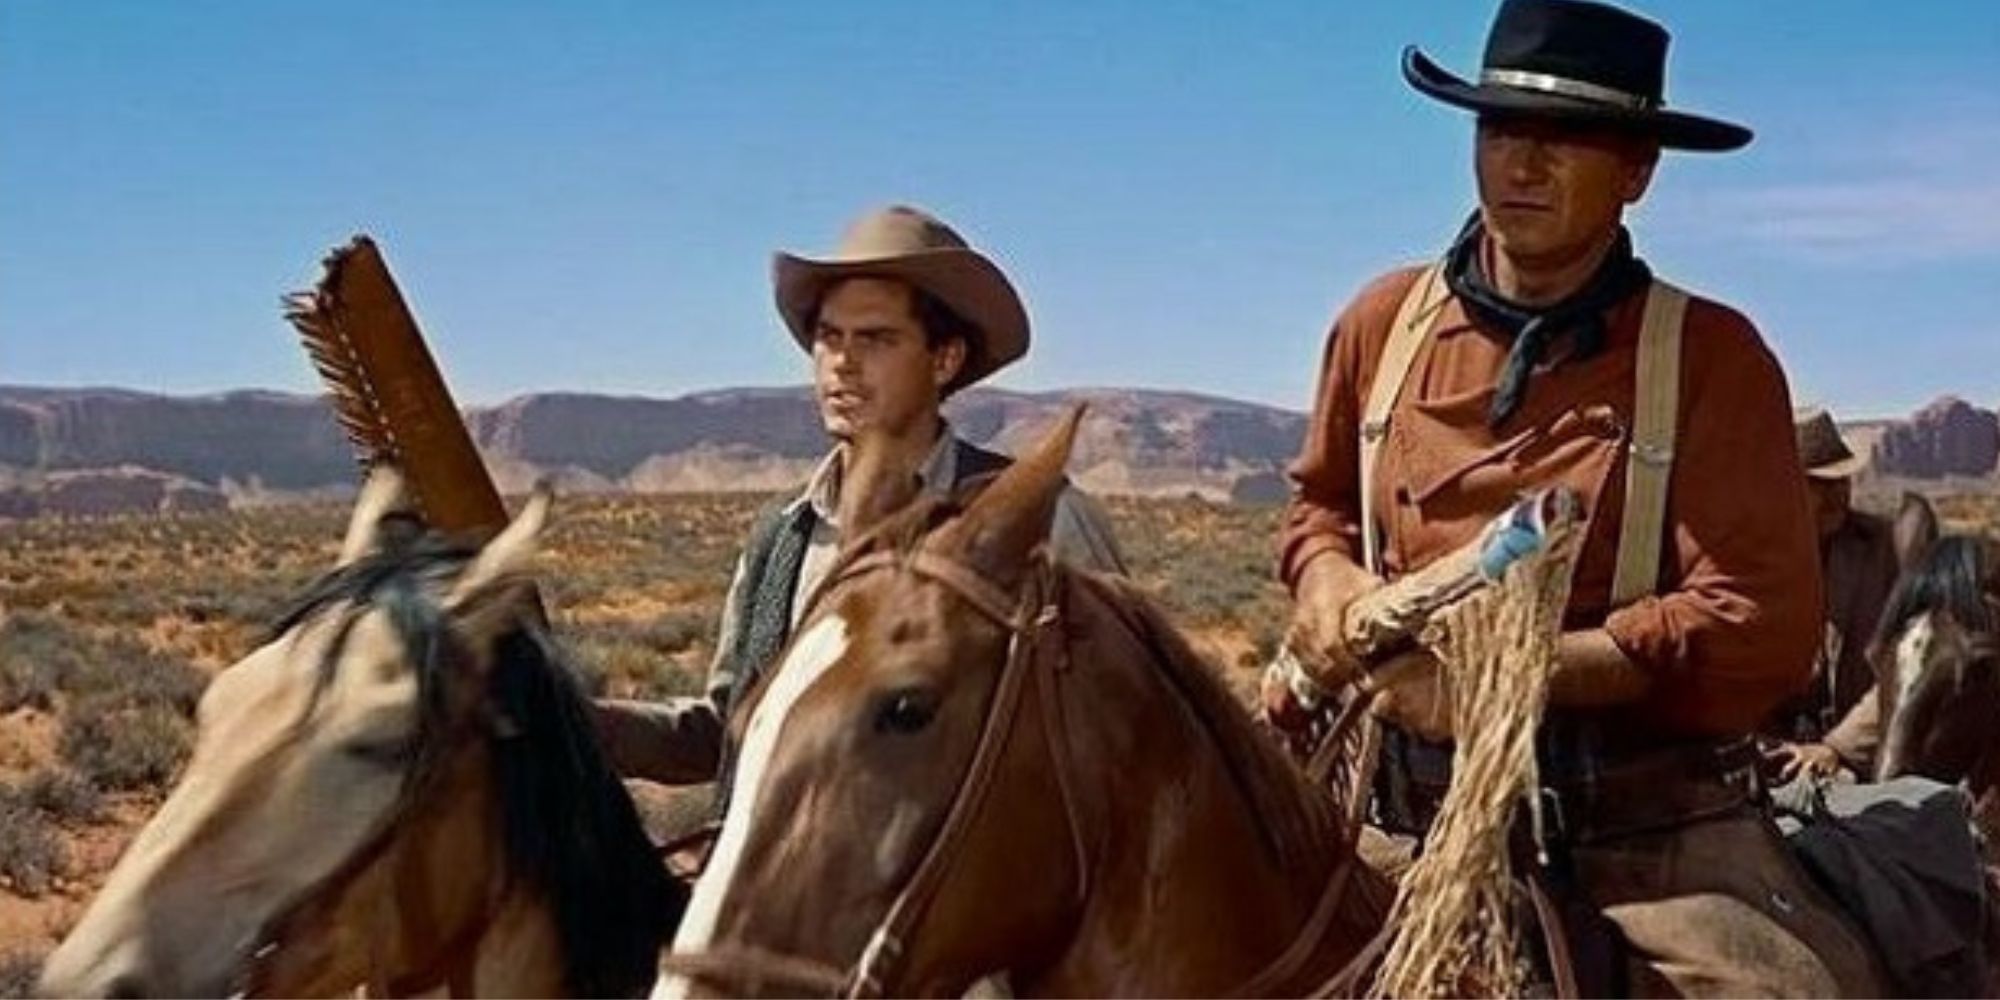 Jeffrey Hunter and John Wayne in the desert on horses in The Searchers